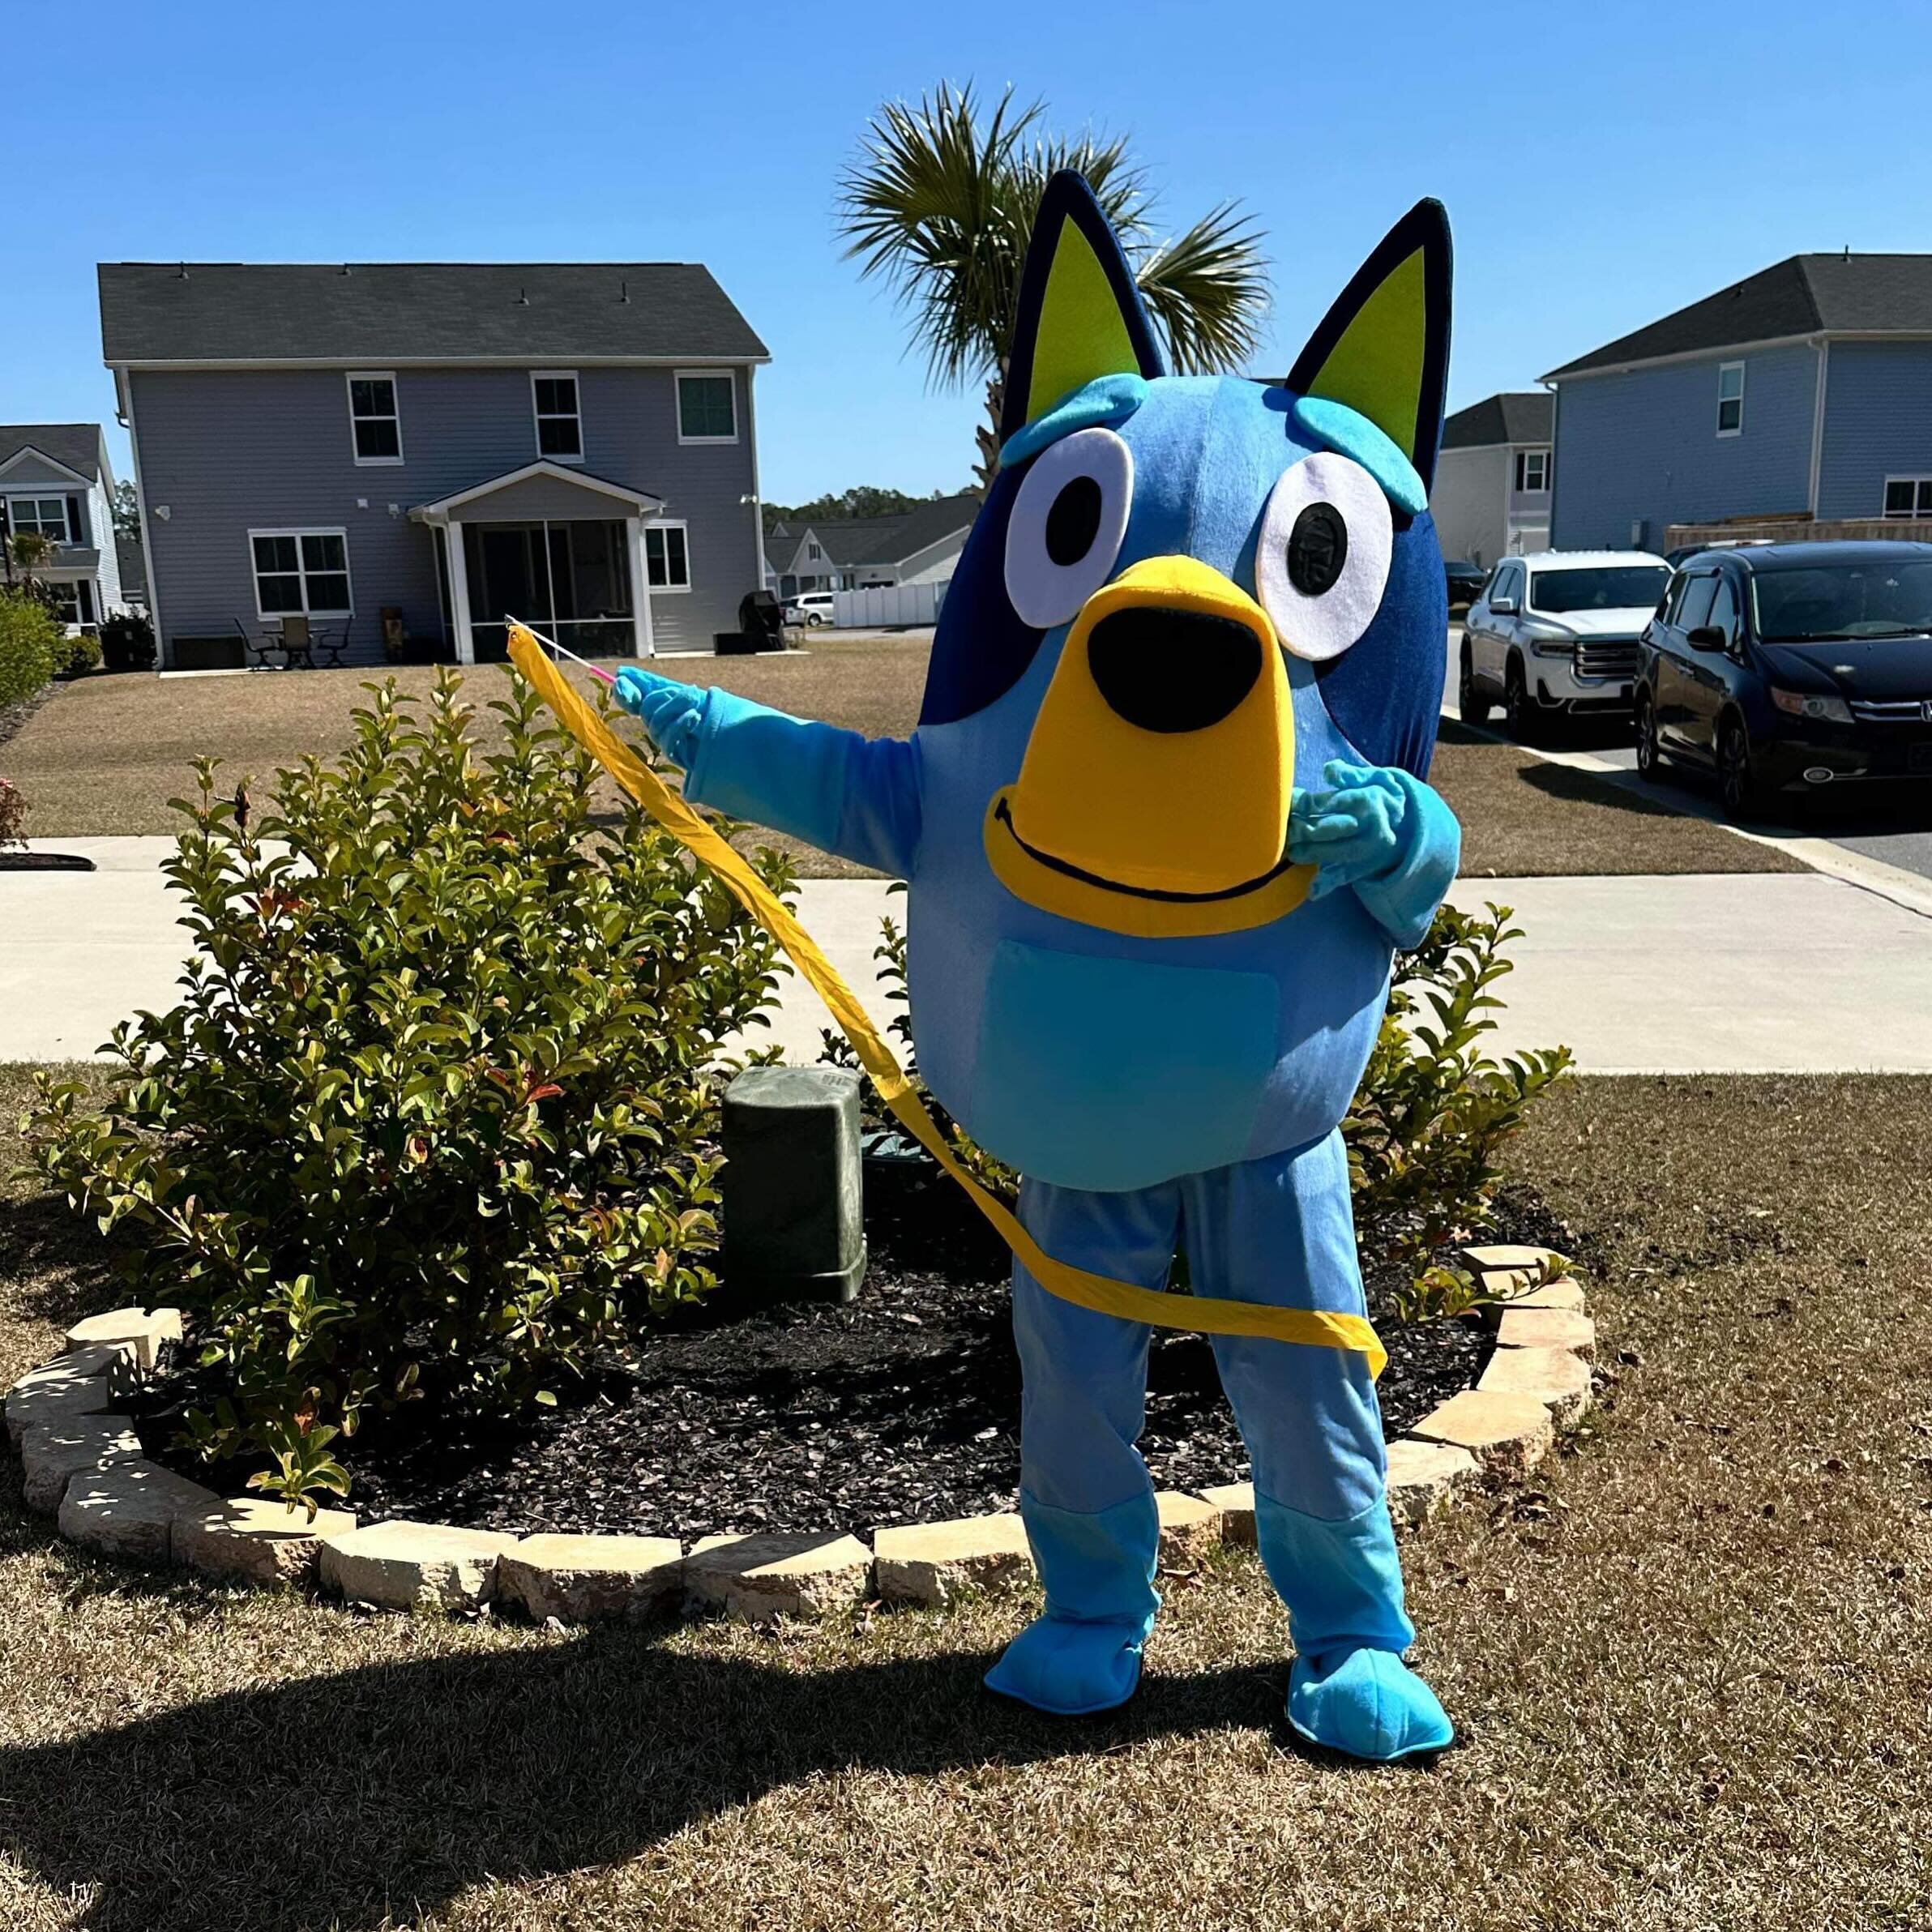 Gather up the kids BLUEY is coming SATURDAY!!!!!!!! She will make a guest appearance from 11am-12pm! #hiltonheadisland #bluey #stpatricksday #shoplocal #shopsmall #lowcountry